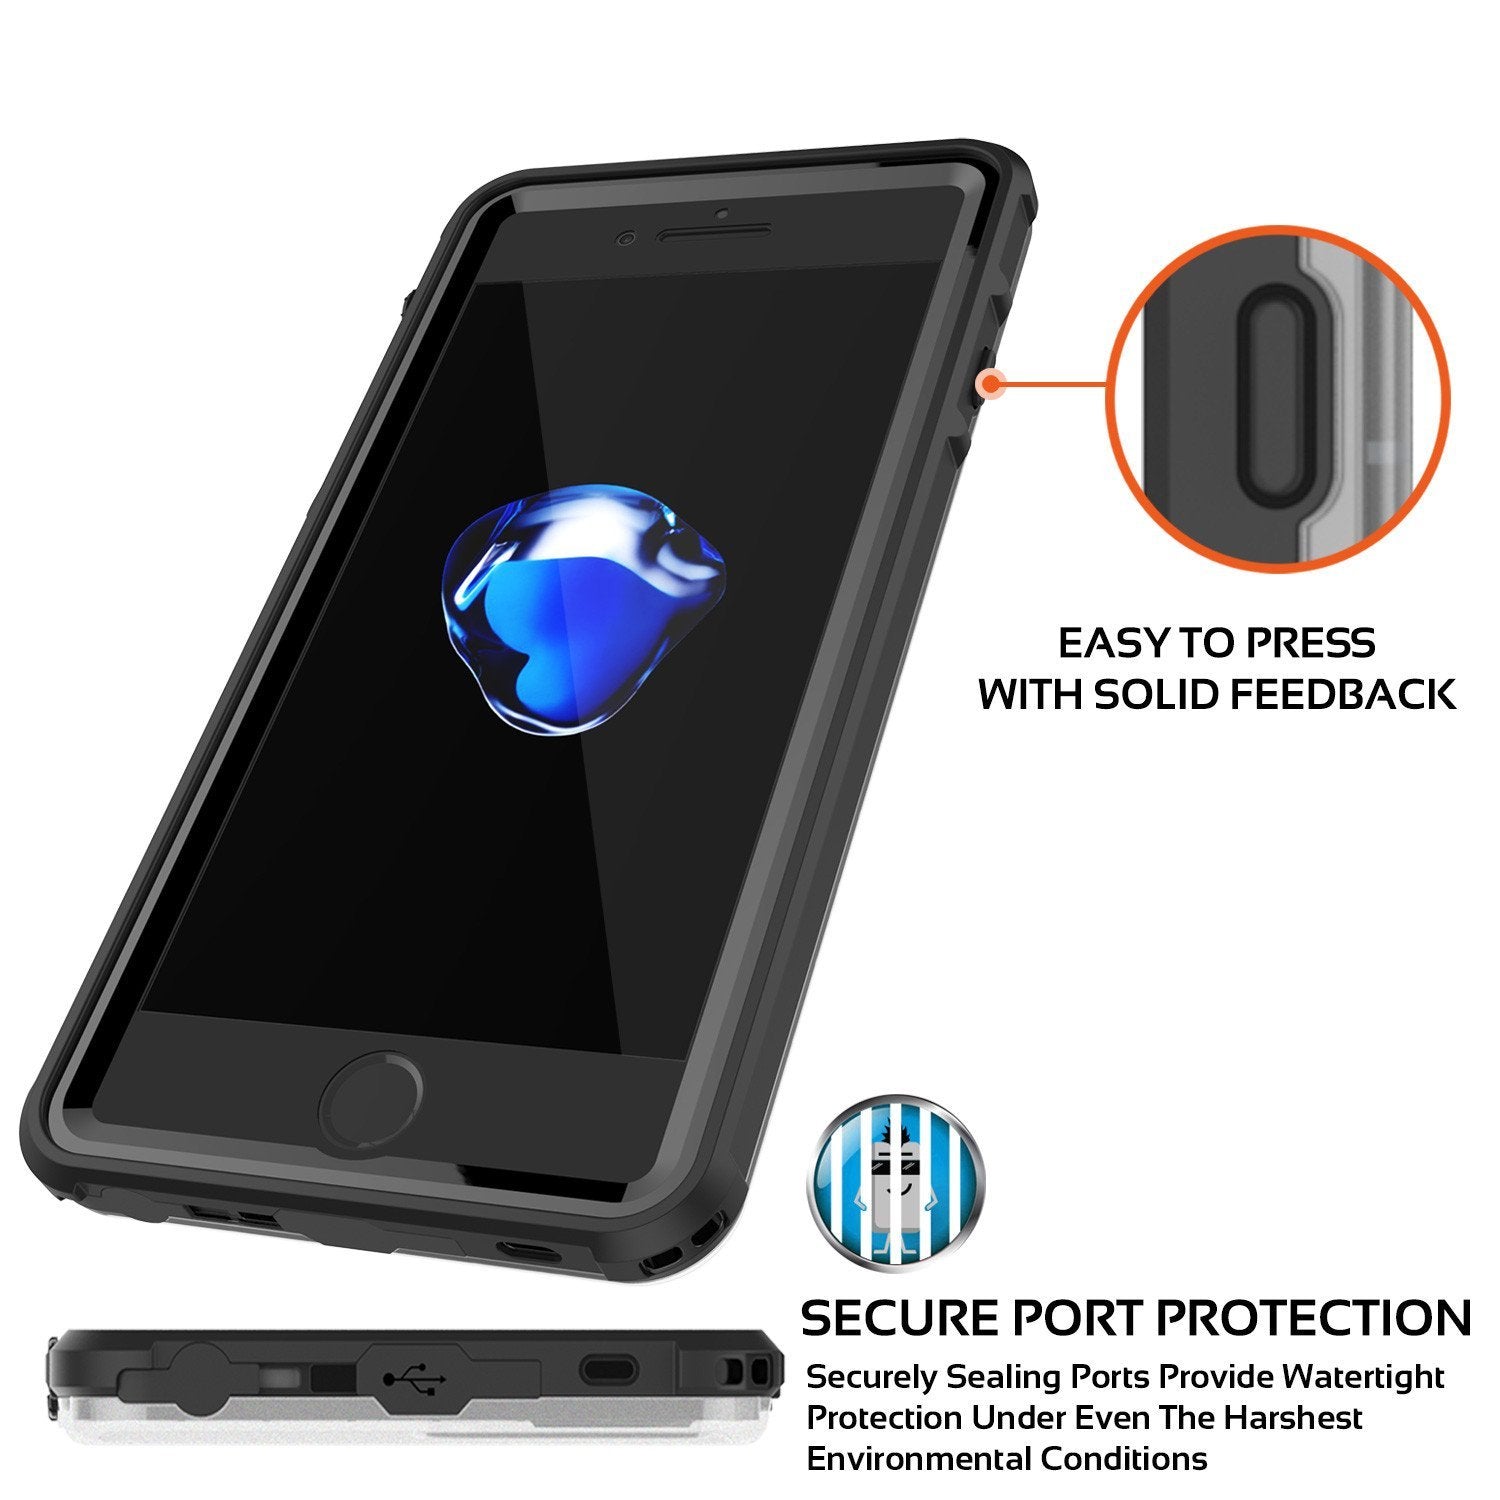 iPhone 8+ Plus Waterproof Case, PUNKcase CRYSTAL Black W/ Attached Screen Protector  | Warranty